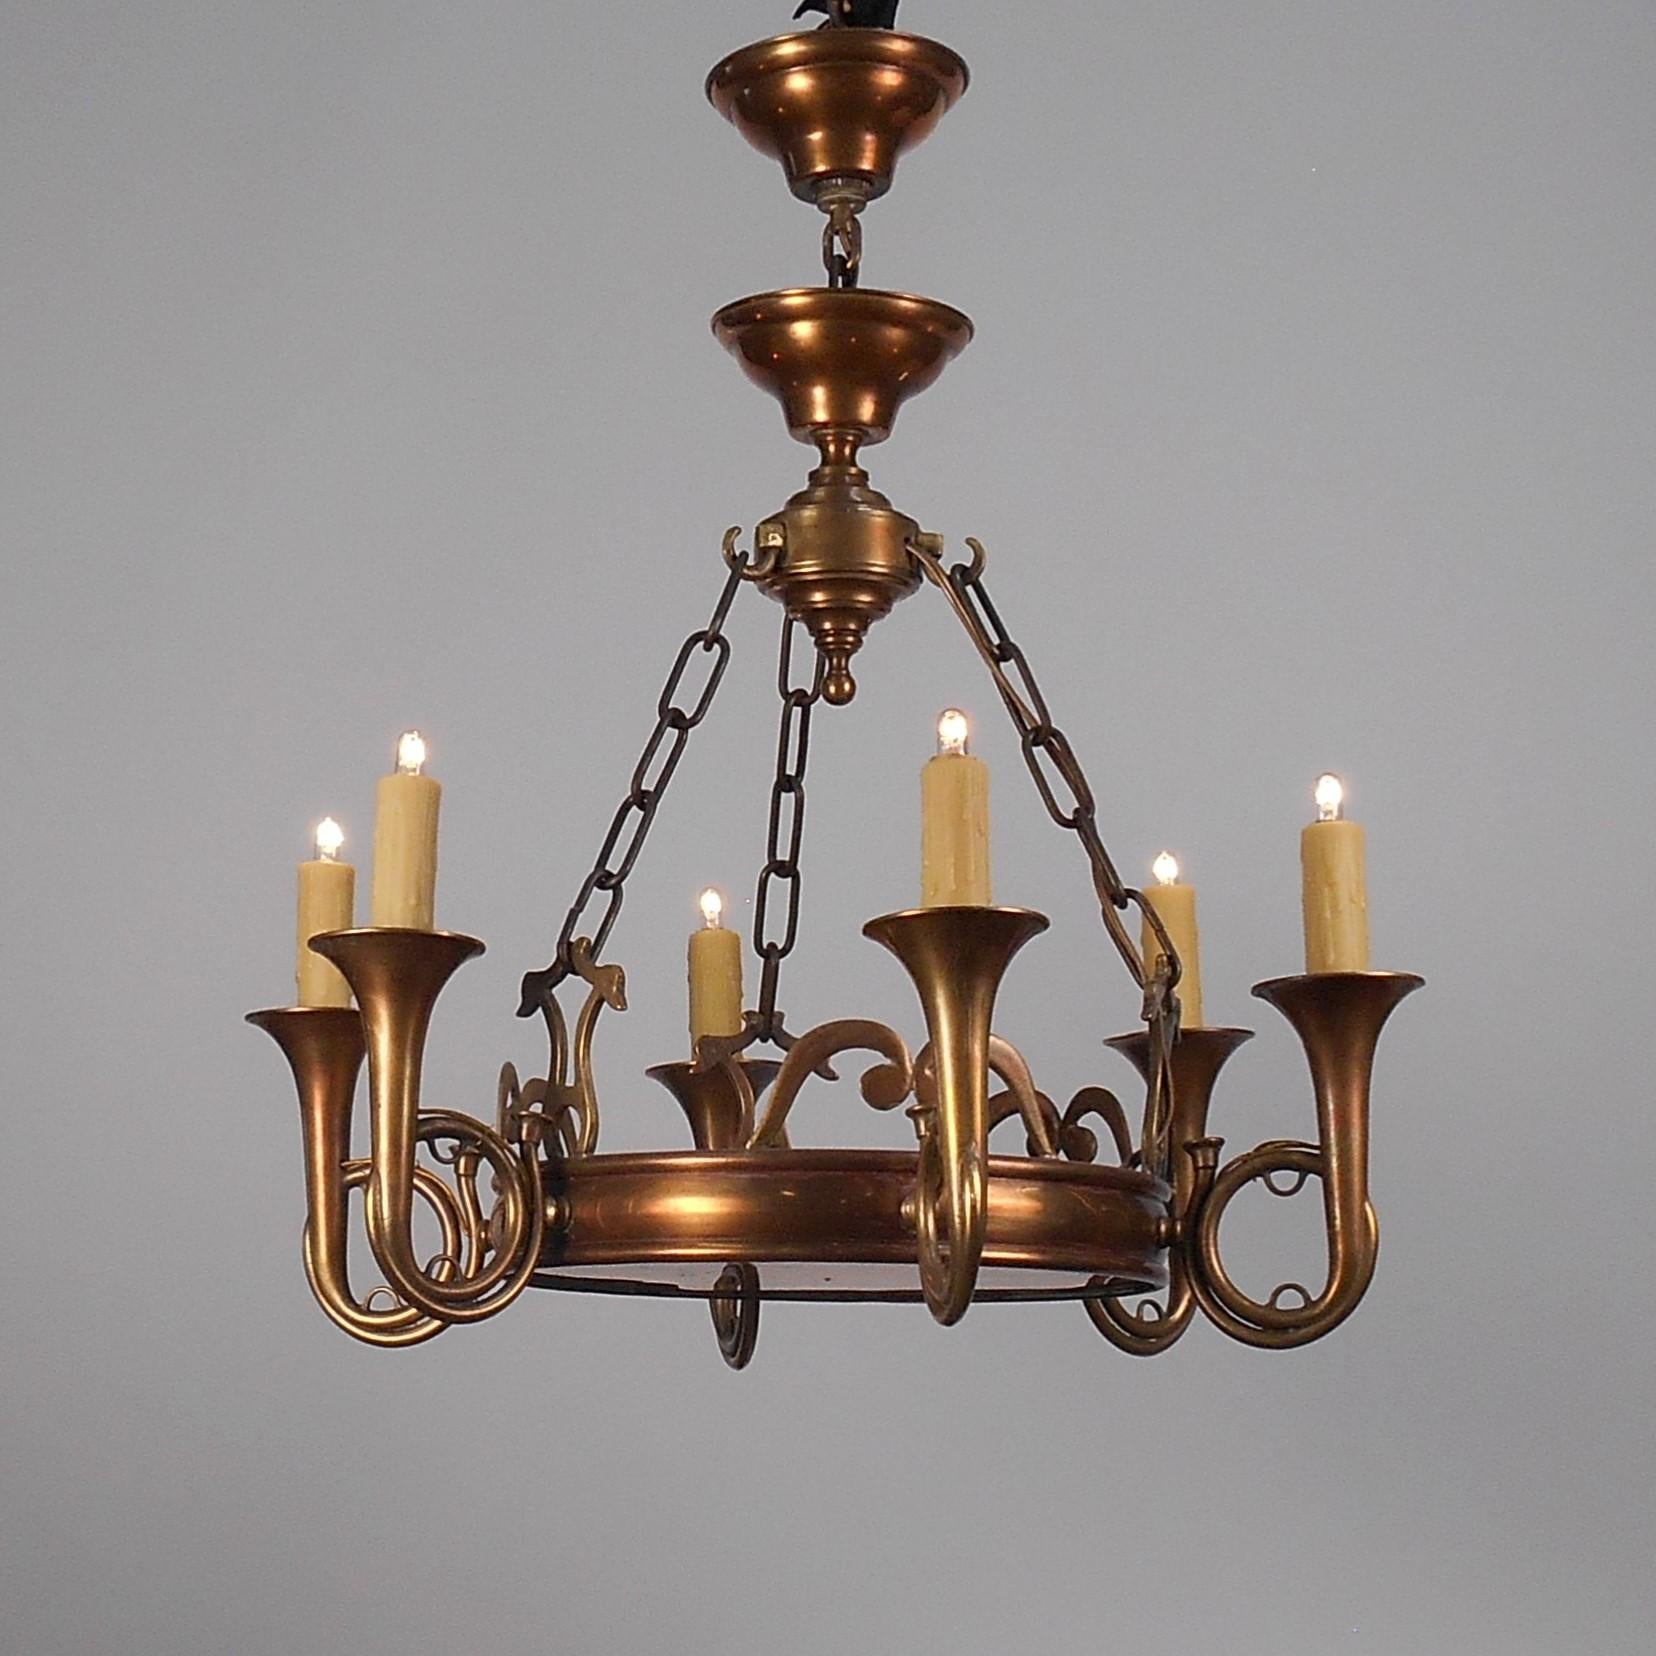 Presented is a copper and brass chandelier featuring six bugle arms with 4